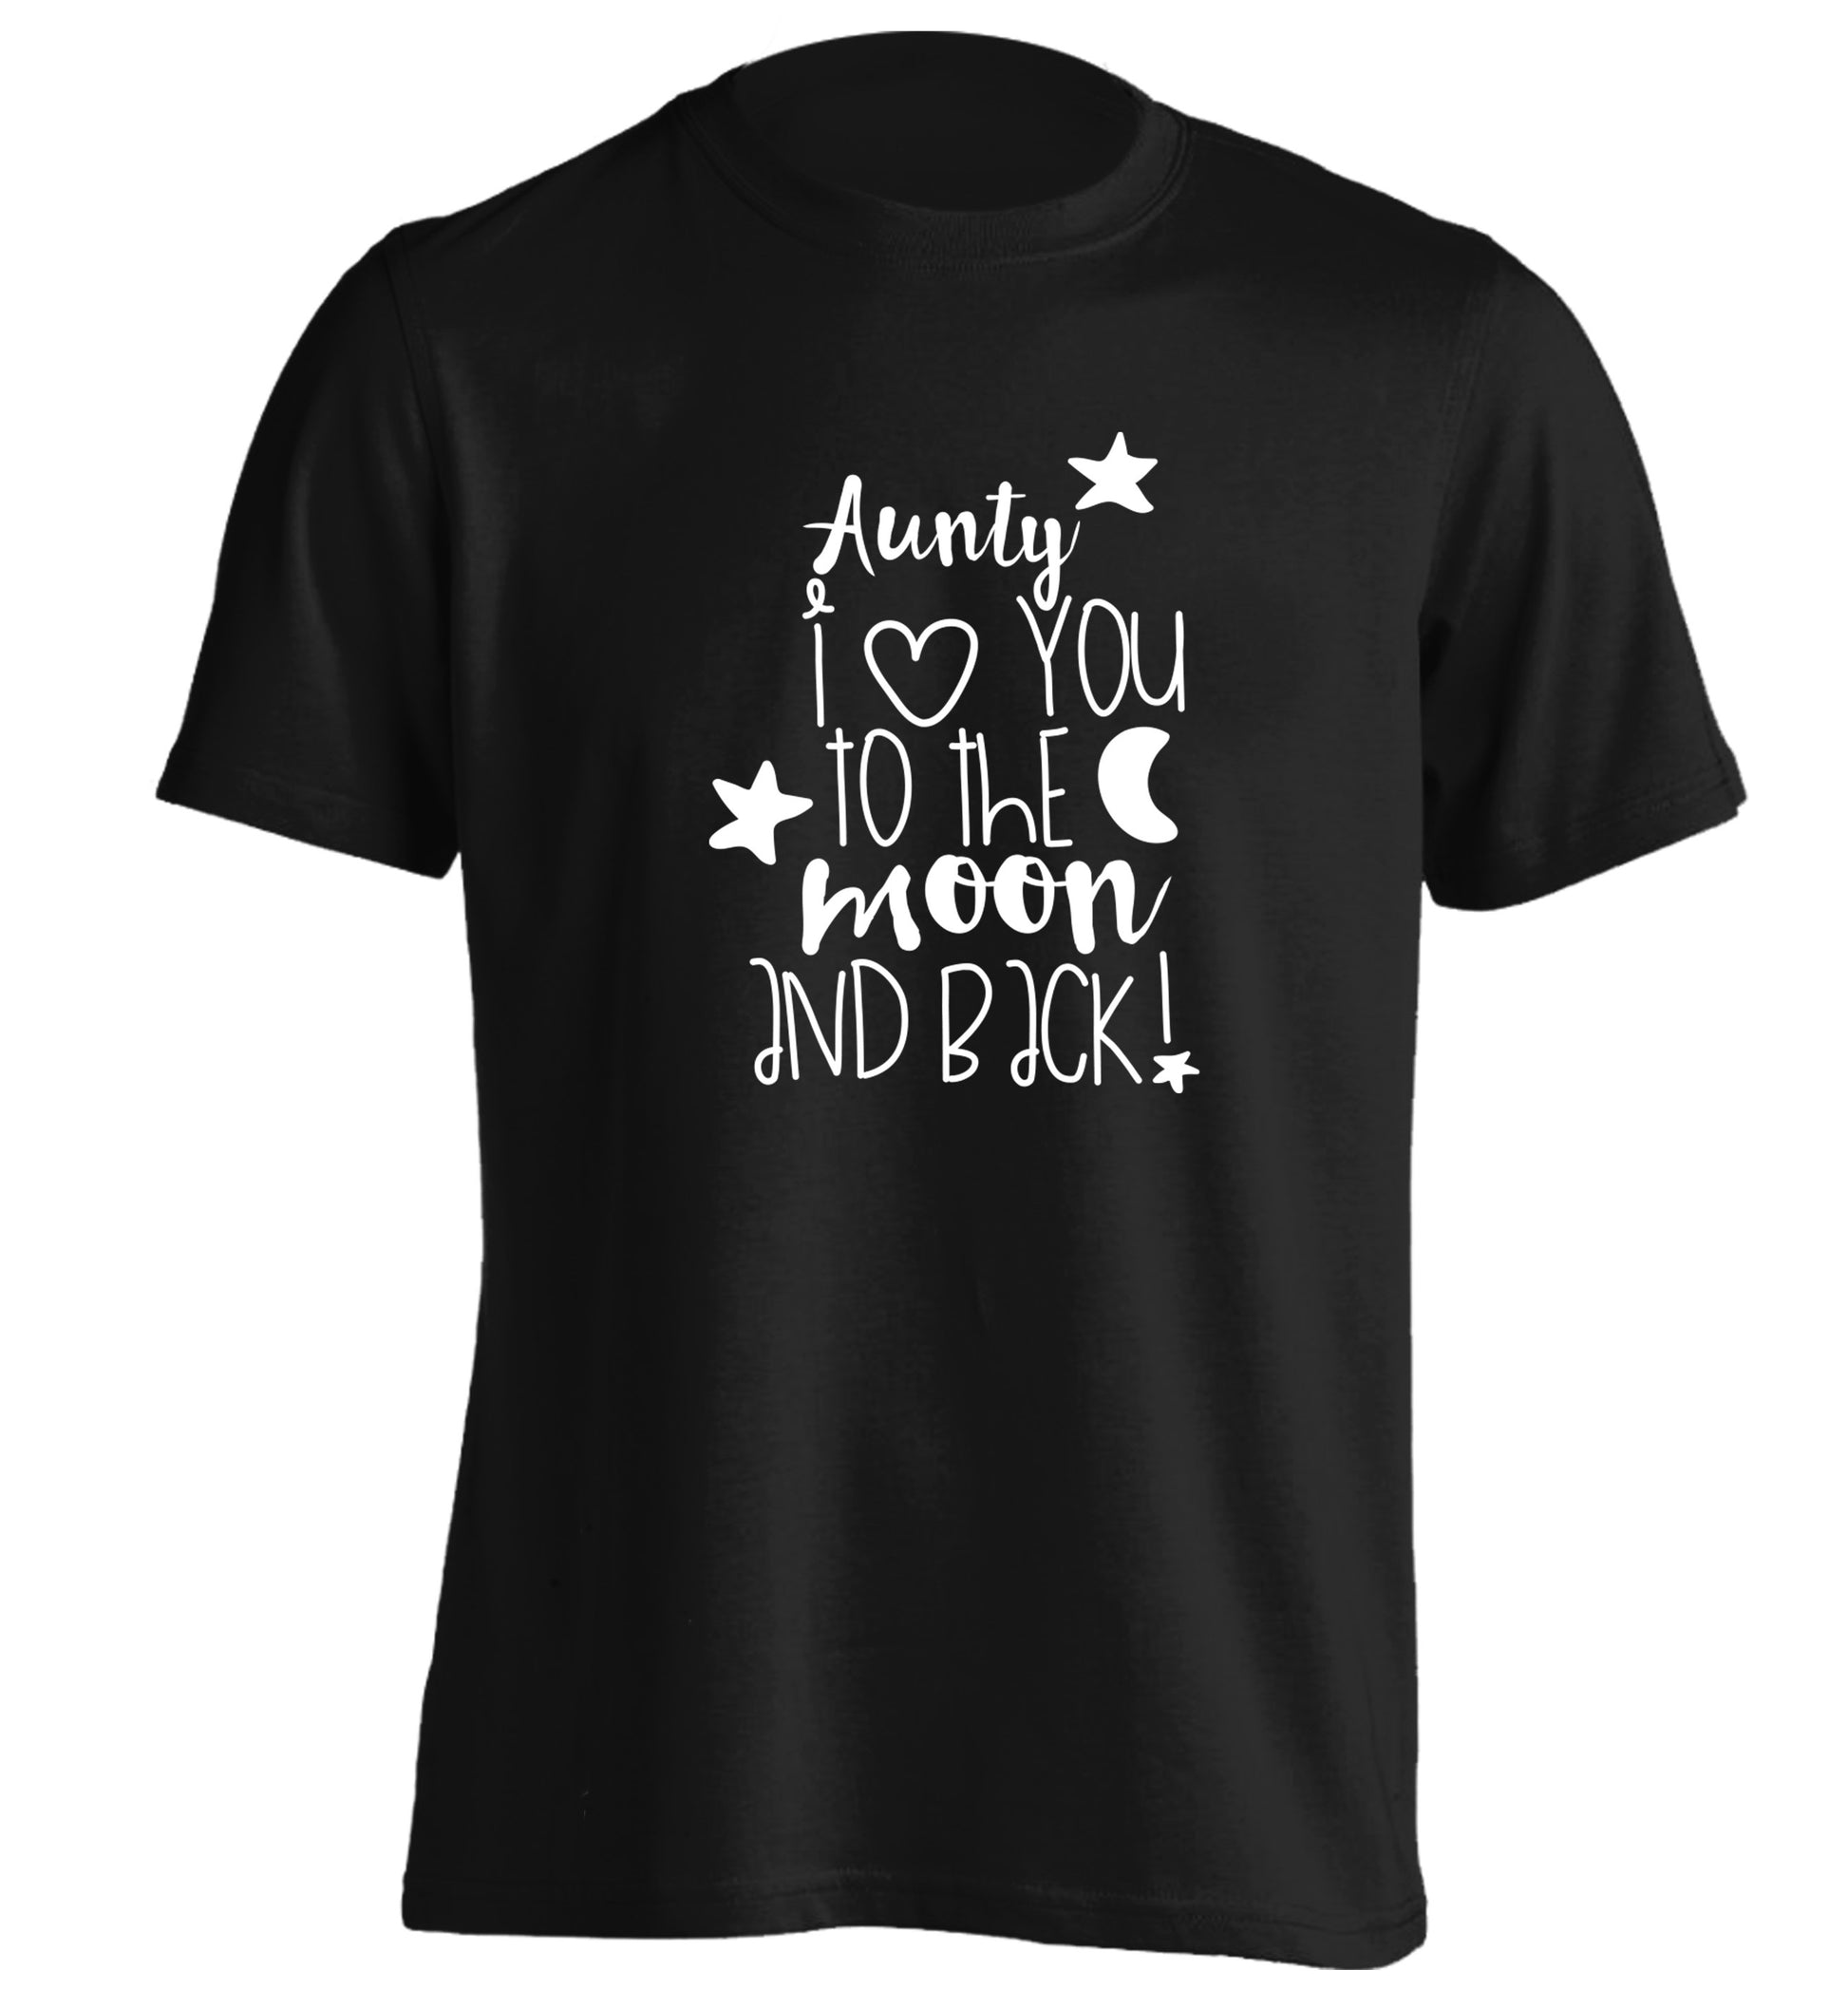 Aunty I love you to the moon and back adults unisex black Tshirt 2XL